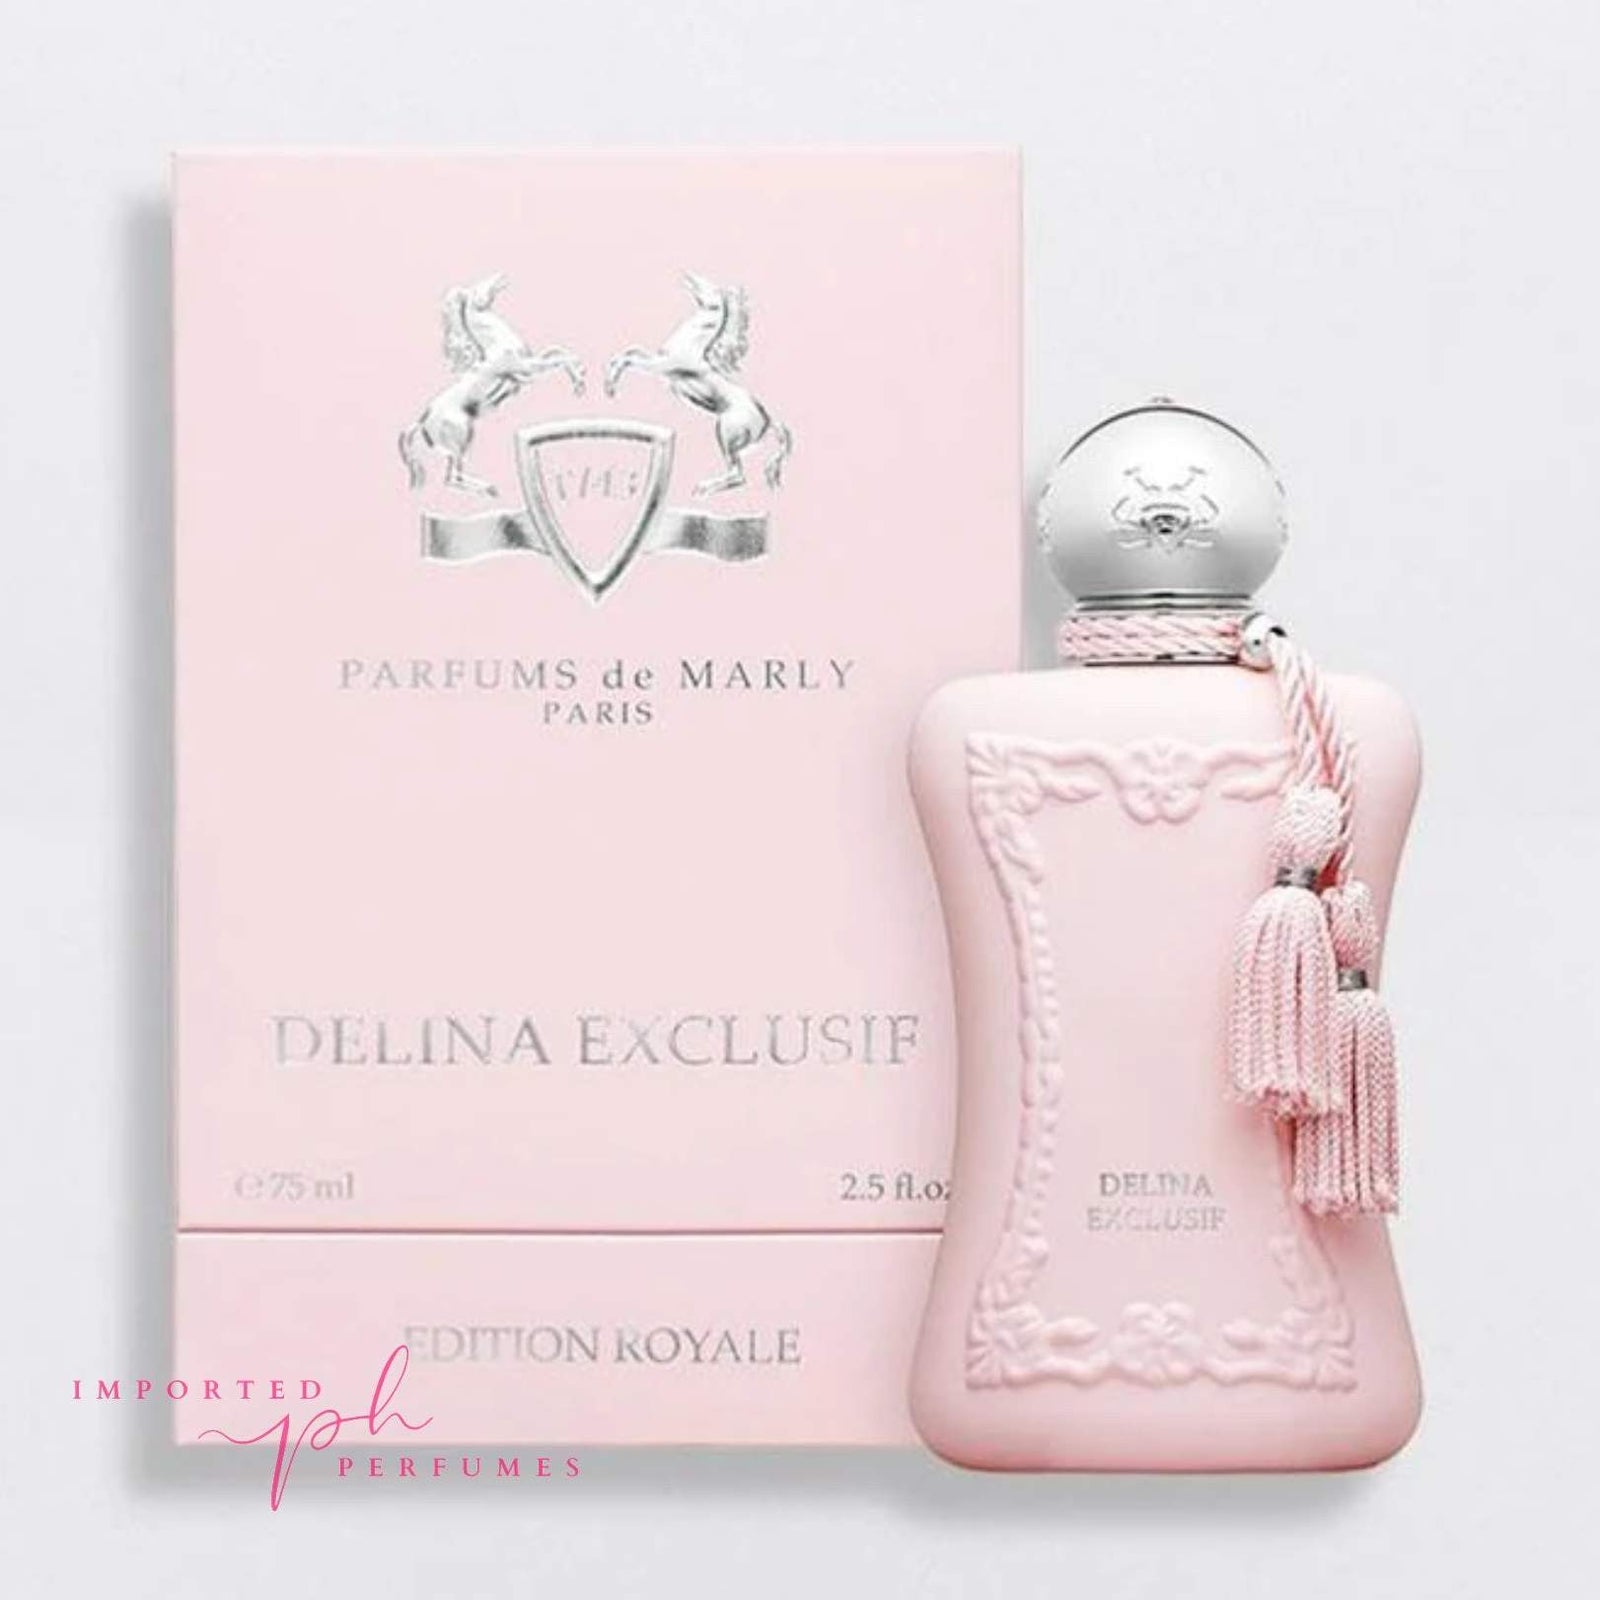 Delina Exclusif Parfums de Marly For Women-Imported Perfumes Co-Parfums de Marly